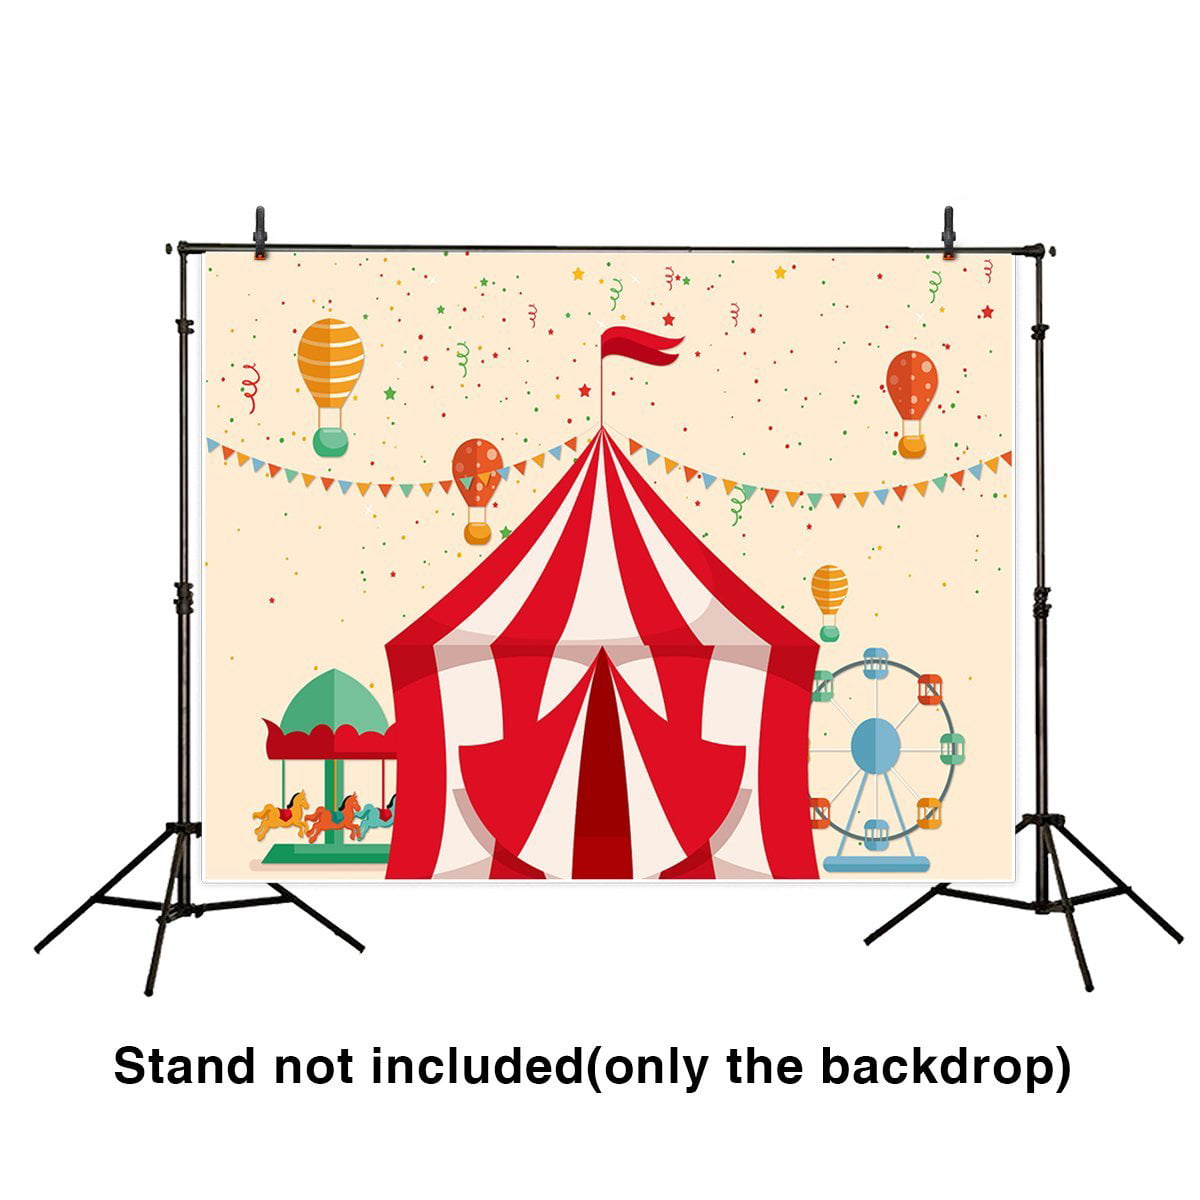 Cartoon Red White Stripes Circus Tent Animals Clowns Backdrop 8x6.5ft Vinyl Elephant Lion Horse Photography Background Kids Baby Portrait Shoot Birthday Party Banner Cake Smash 